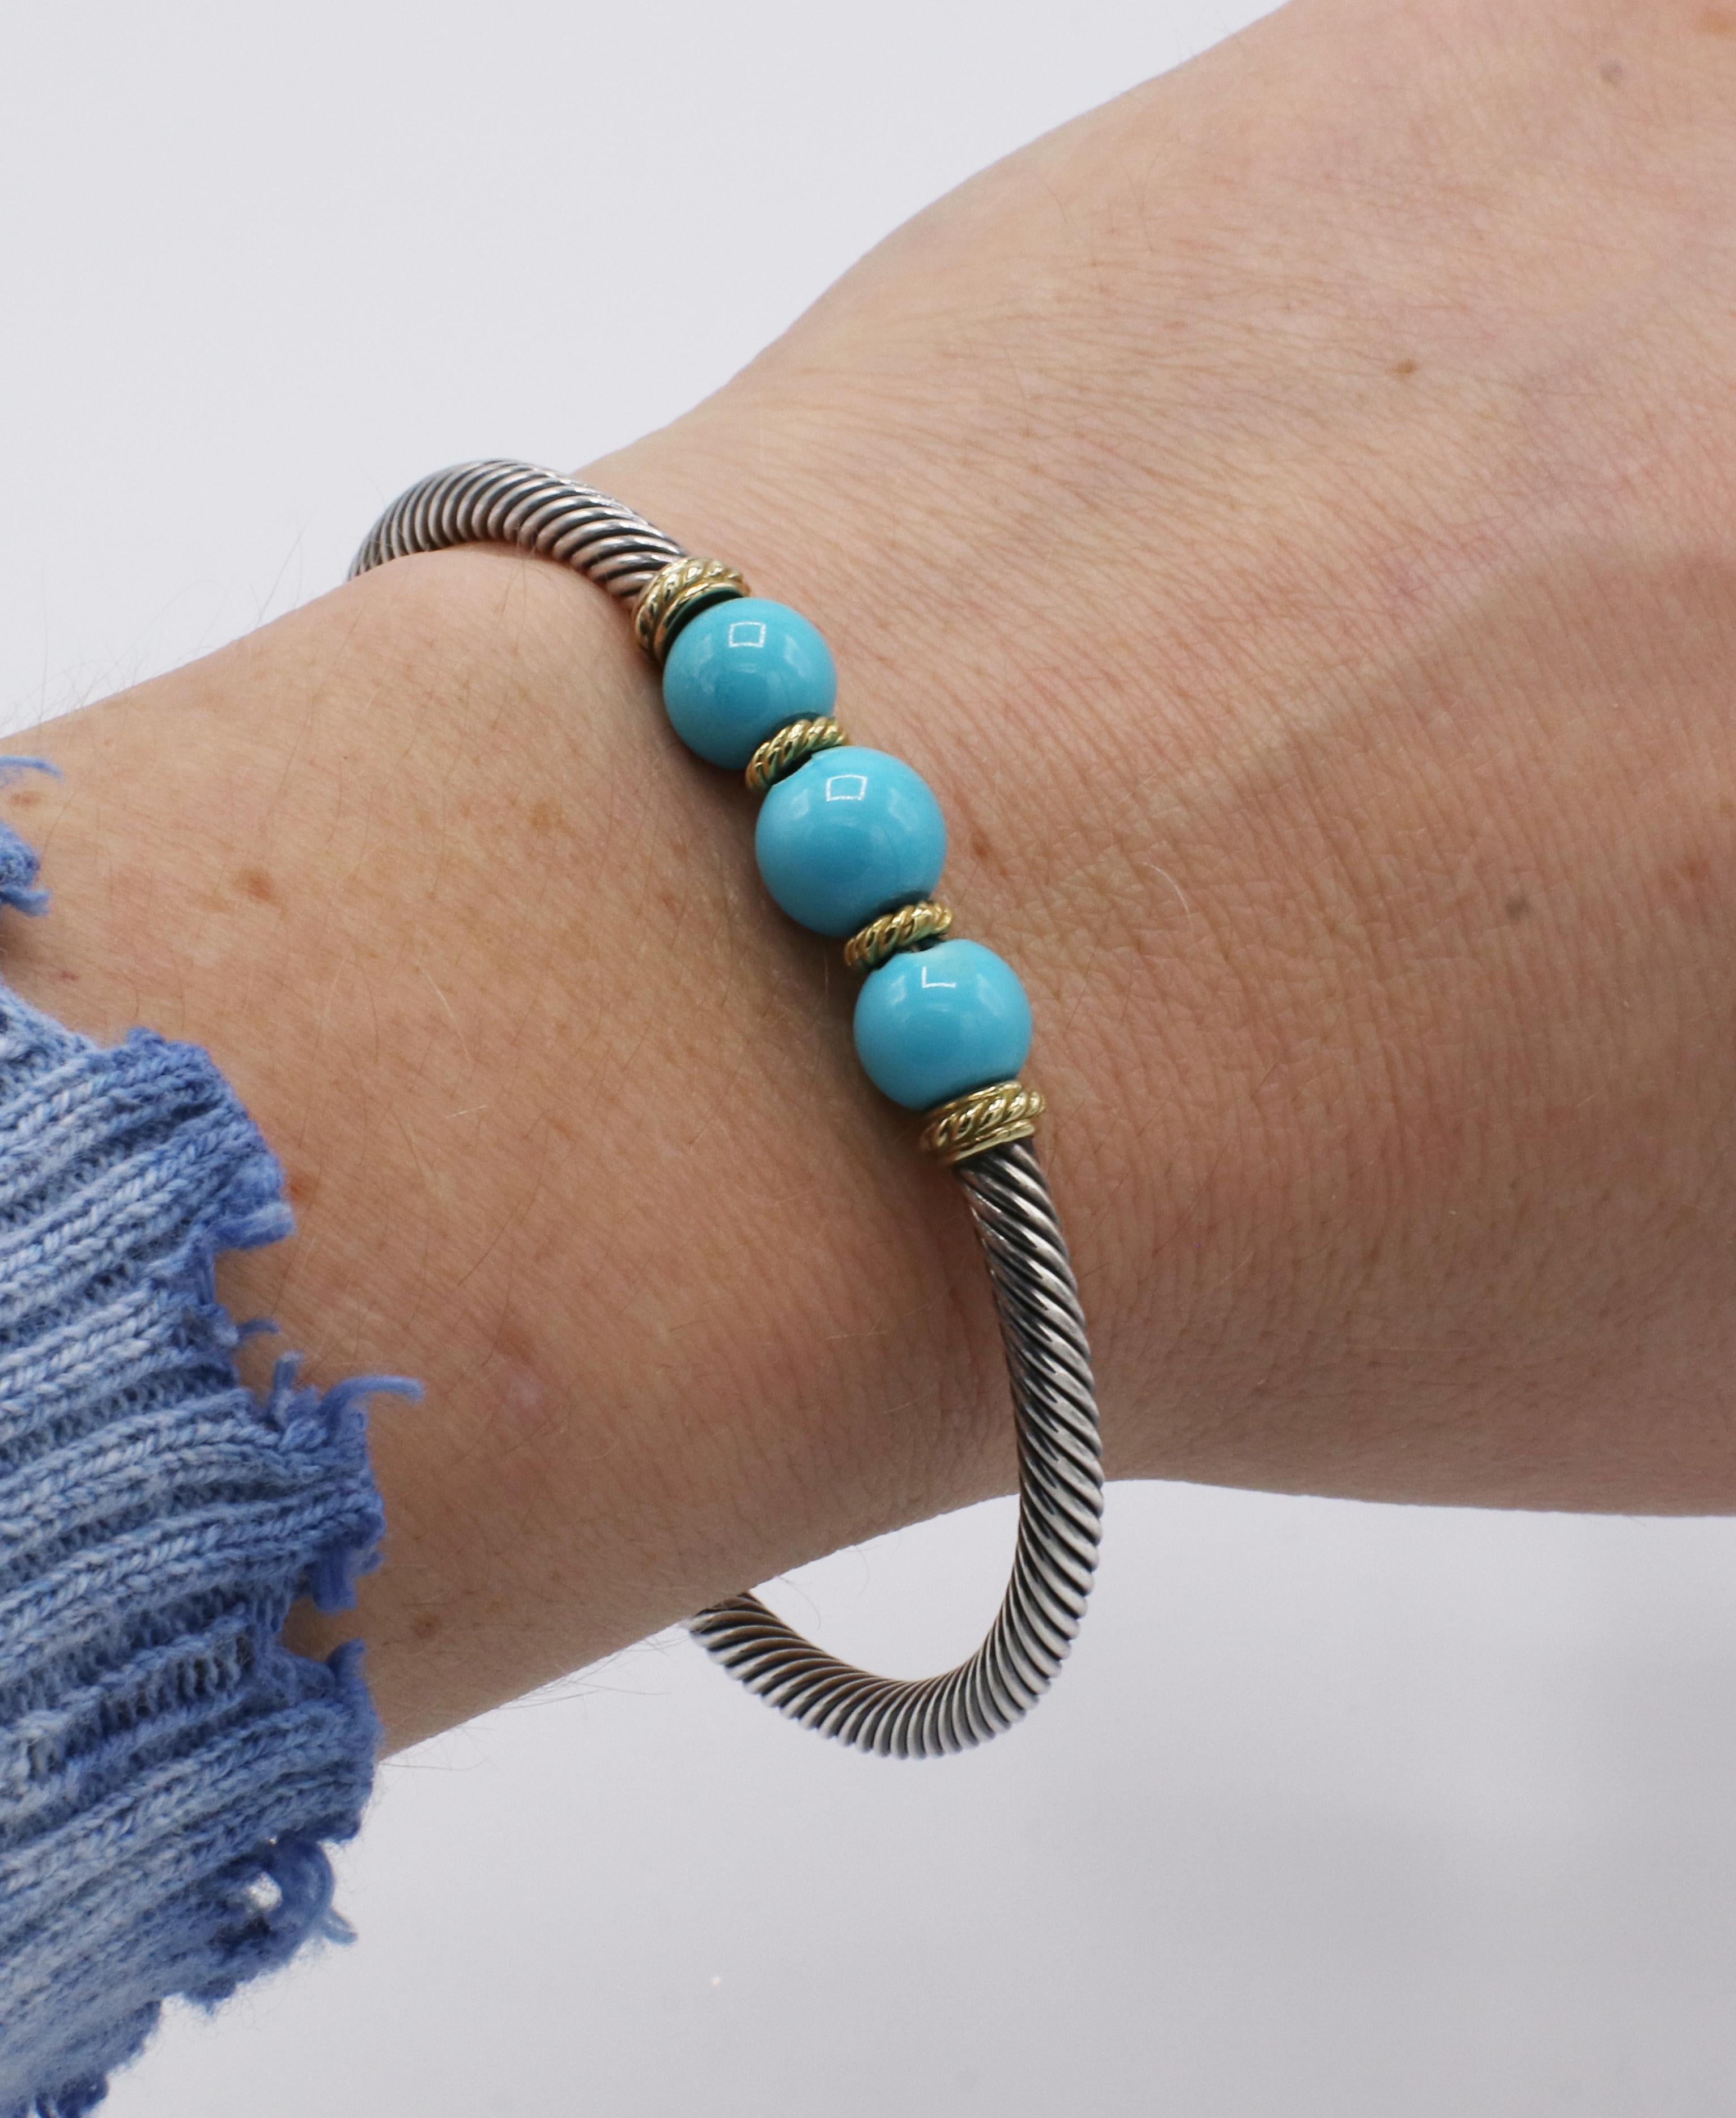 David Yurman Cable Sterling Silver & Gold Turquoise Bead Bracelet *Note* Beads chipped, sold AS IS
Metal: Sterling silver & 18k yellow gold
Weight: 19 grams
Cable width: 3.5mm
Turquoise: 8-9mm beads, chips on the sides
Circumference: Approx.